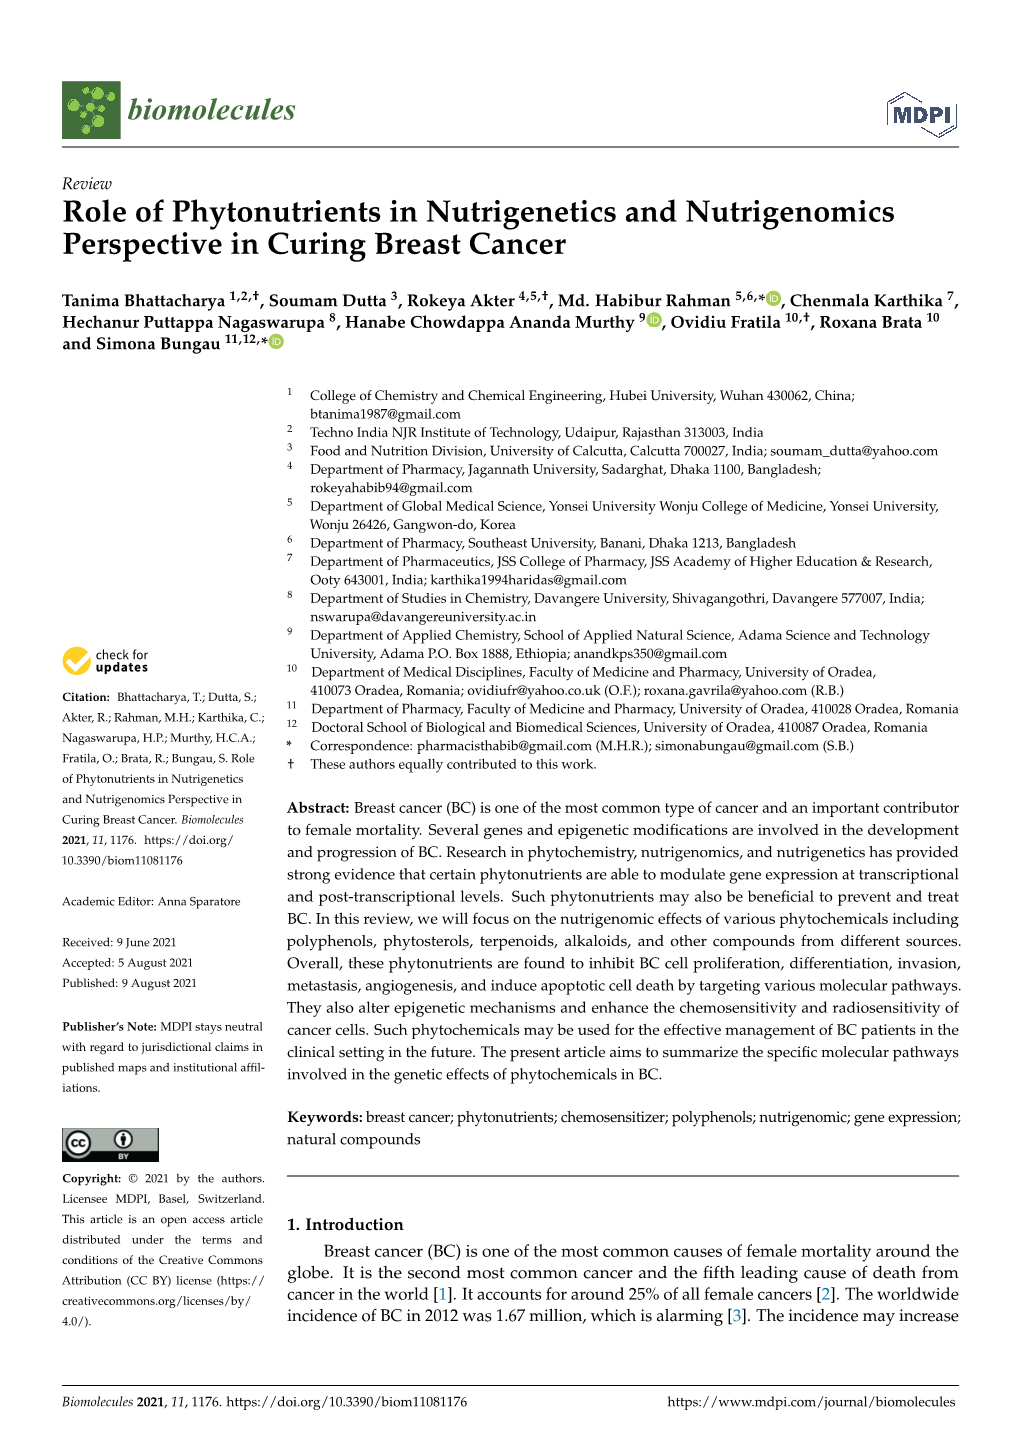 Role of Phytonutrients in Nutrigenetics and Nutrigenomicperspective in Curing Breast Cancer